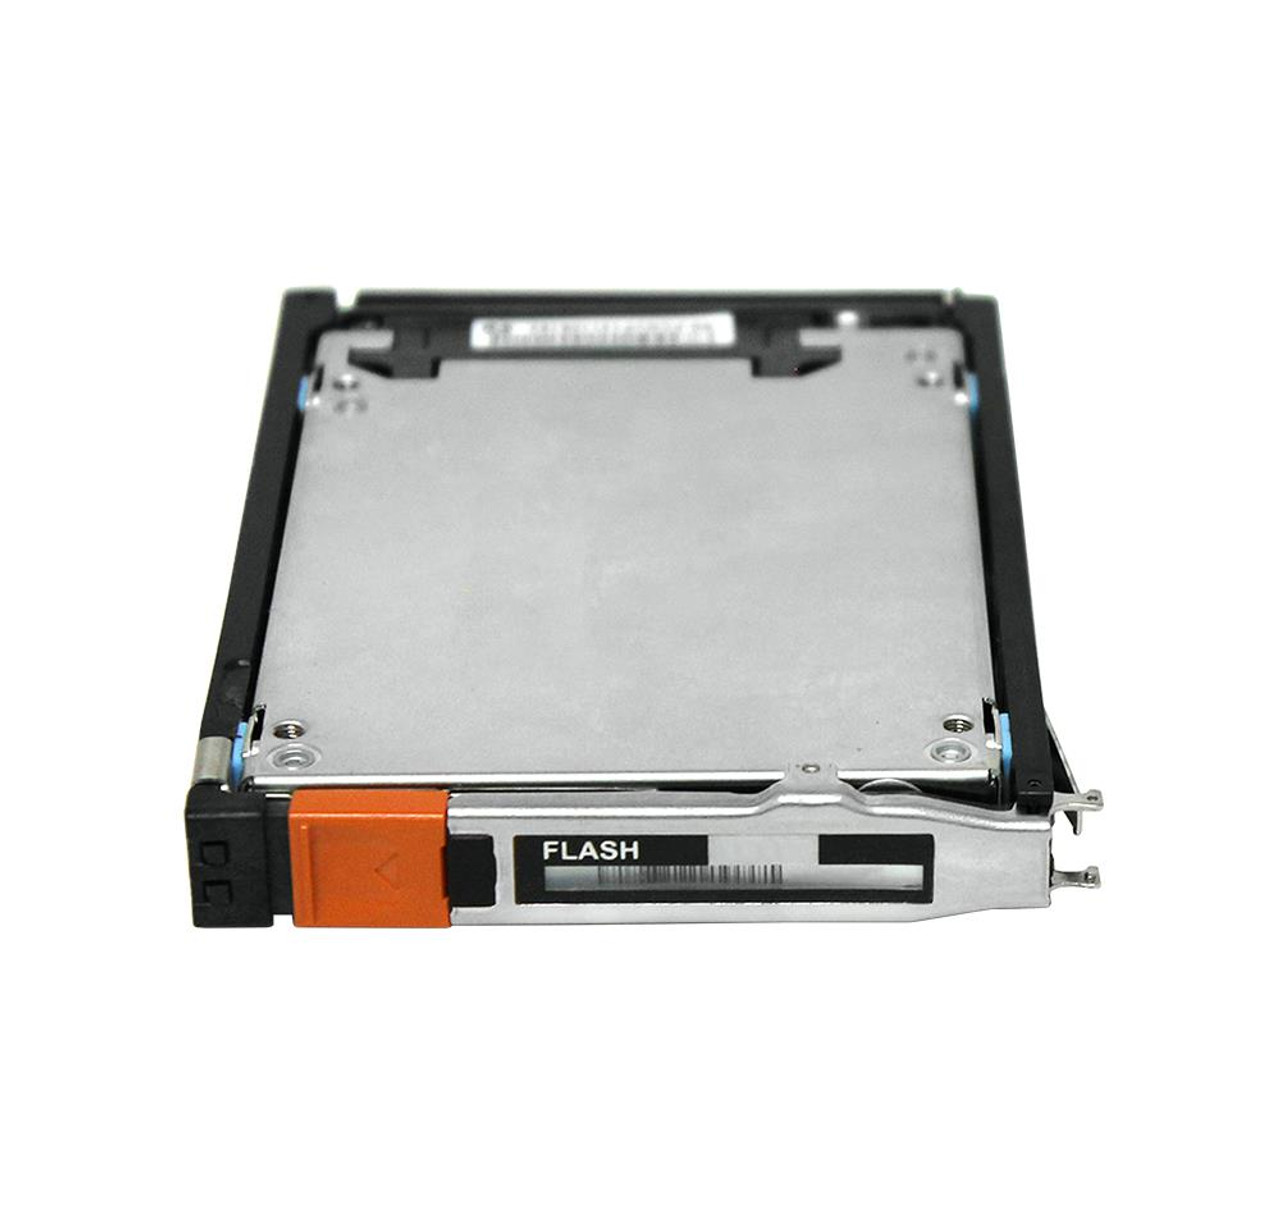 5050531 EMC 100GB SAS 6Gbps 2.5-inch Internal Solid State Drive (SSD) for VNX Series Storage Systems